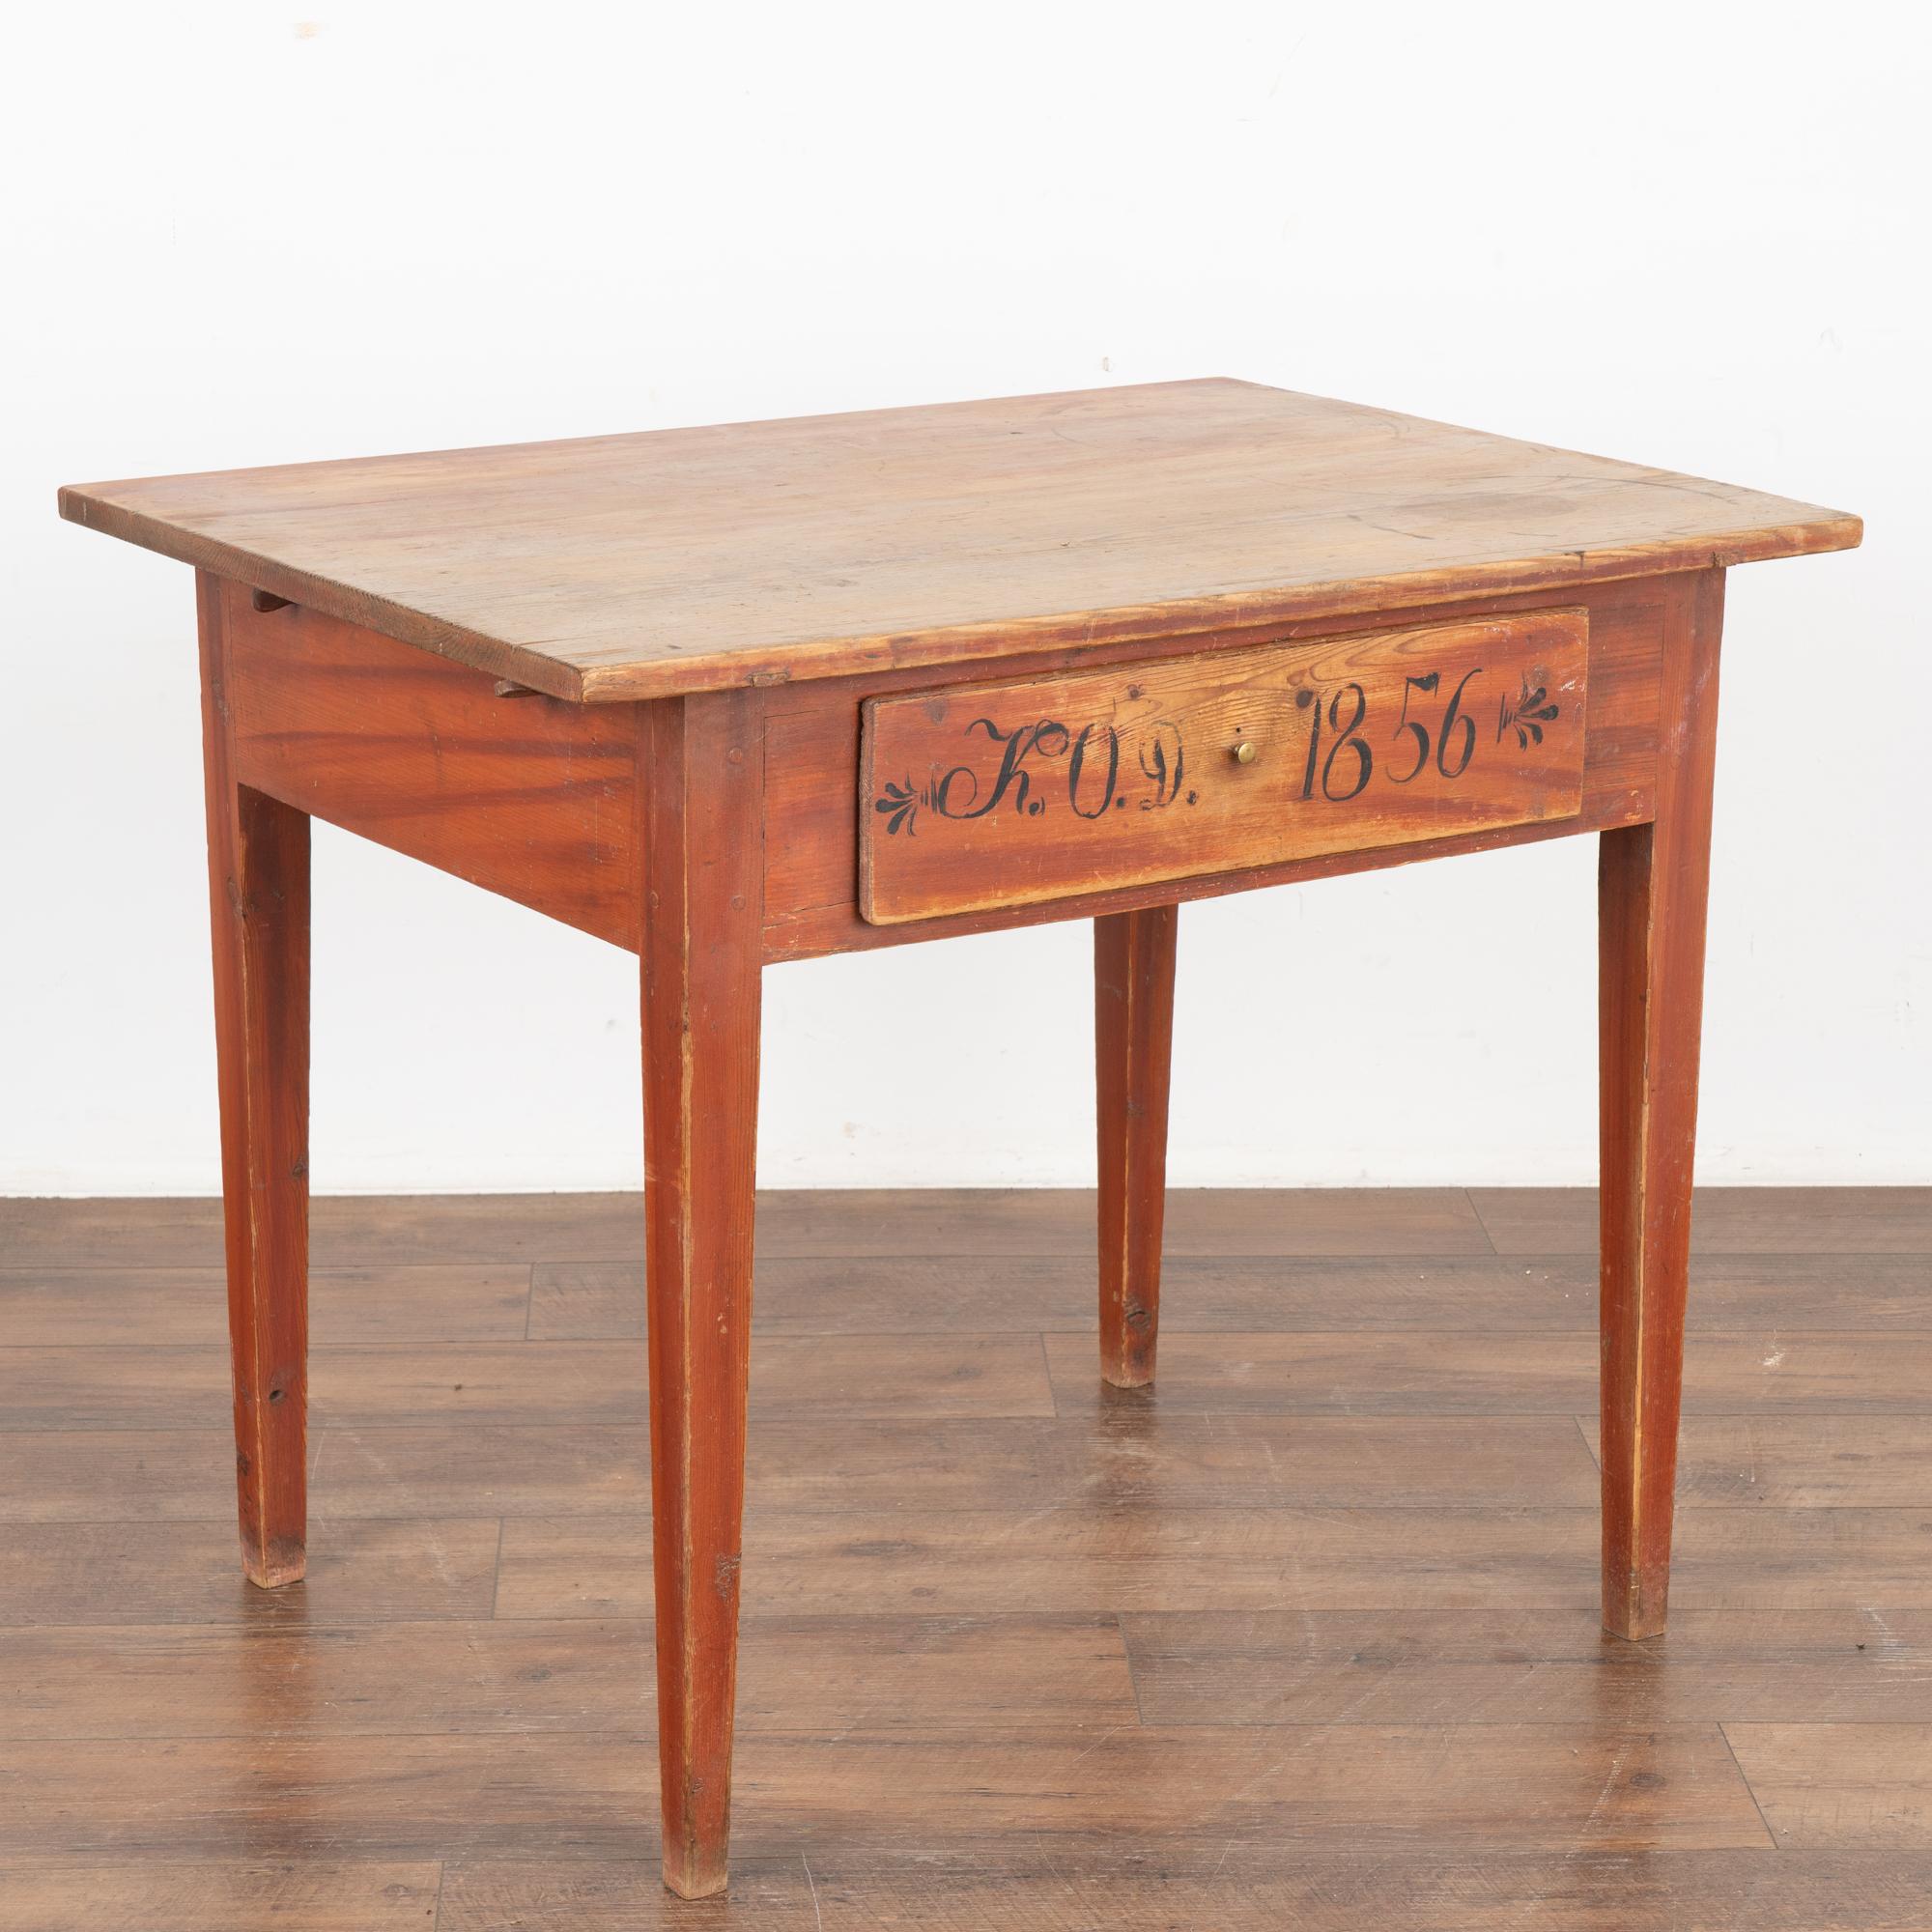 This delightful pine side table comes from the Swedish countryside and still maintains the original faux wood painted finish in brick red.
The single drawer has monogram of K.O.D. and date of 1856 which indicate it may have served as a wedding